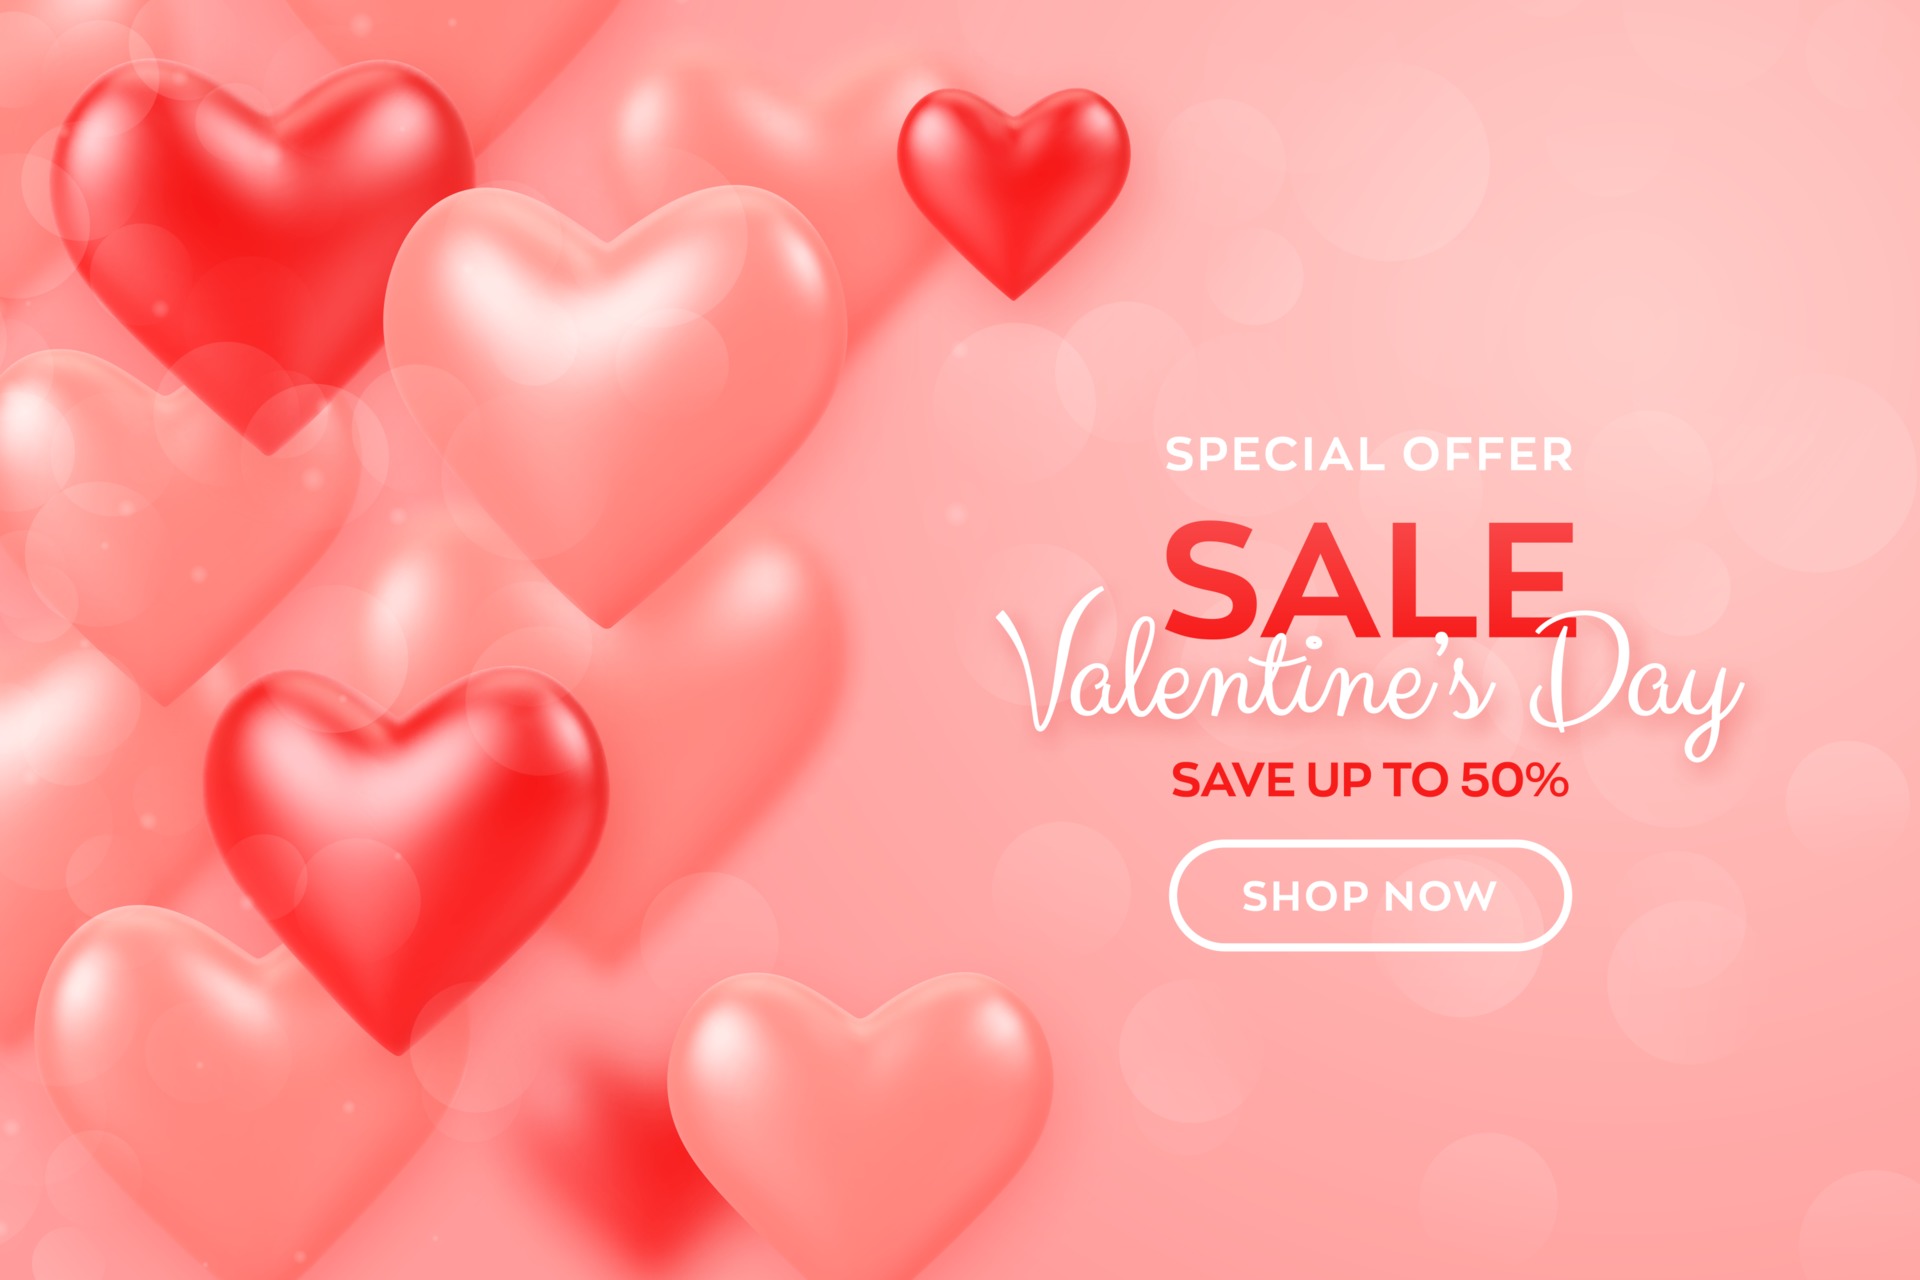 Happy Valentine's Day. Valentines day sale banner with red and pink balloons 3D hearts background. Wallpaper, flyer, invitation, poster, brochure, greeting card